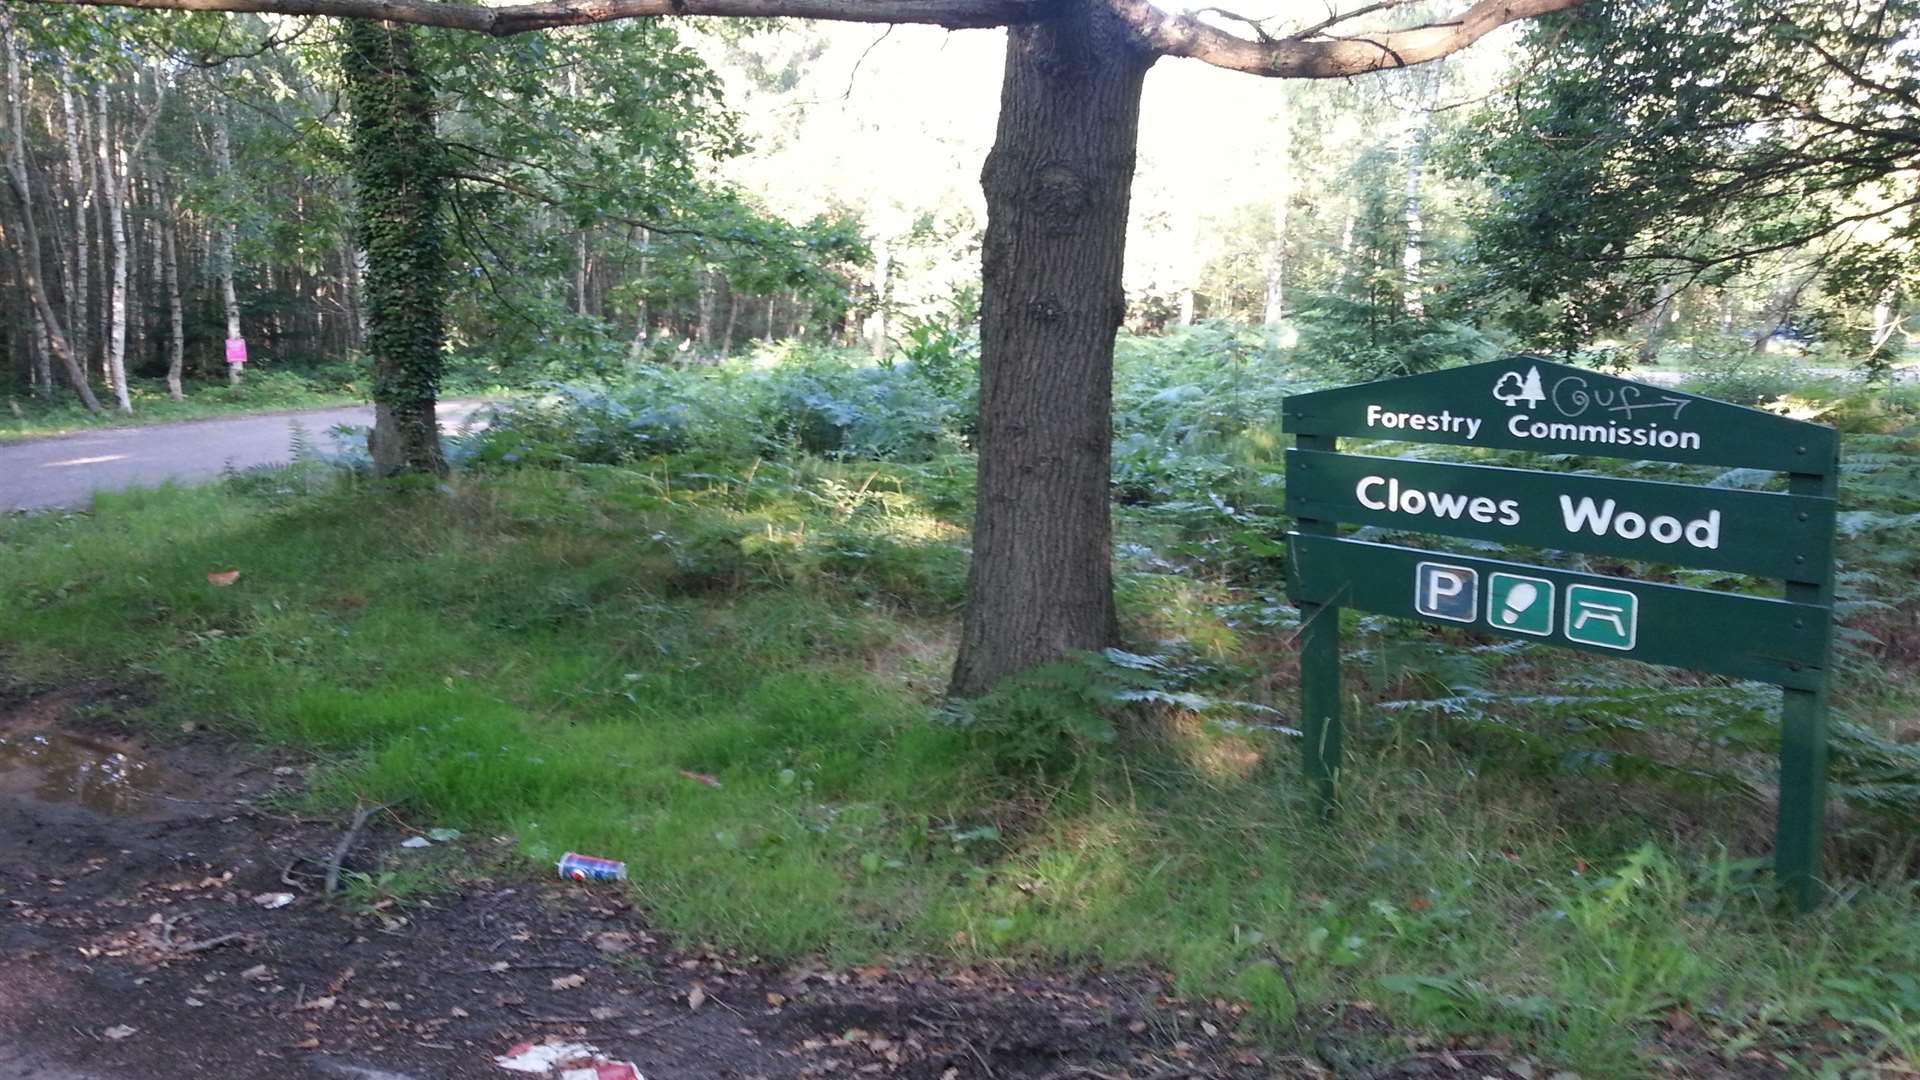 The entrance to Clowes Wood near Chestfield